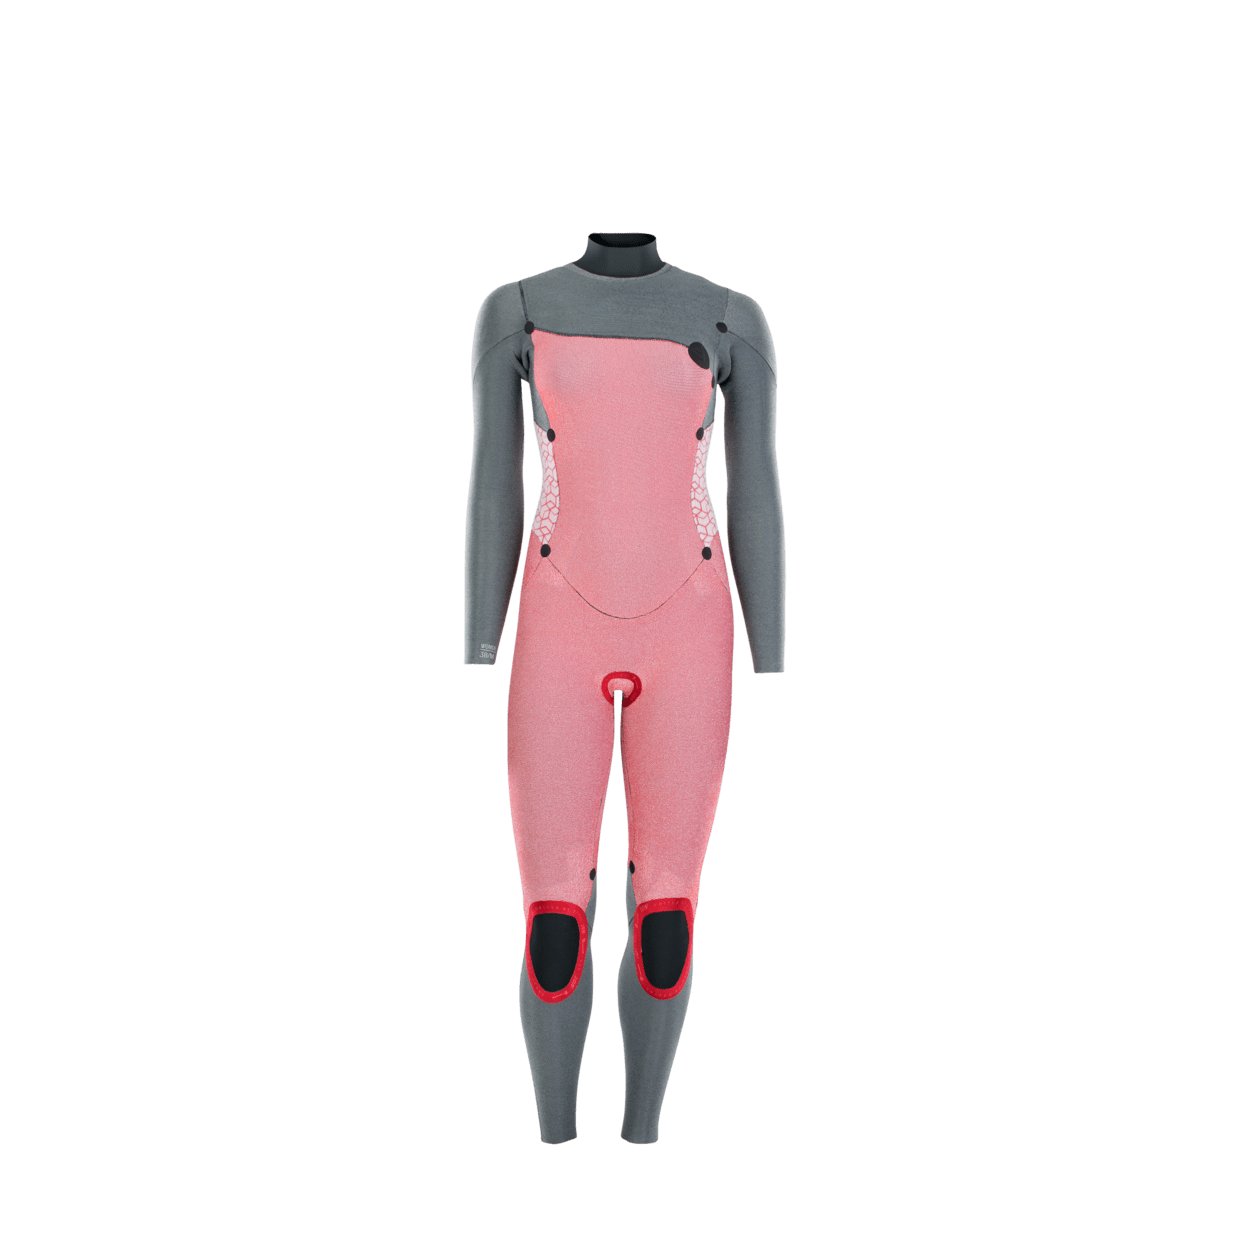 ION Amaze Core 5/4 Front Zip 2022 - Worthing Watersports - 9010583057989 - Wetsuits - ION Water